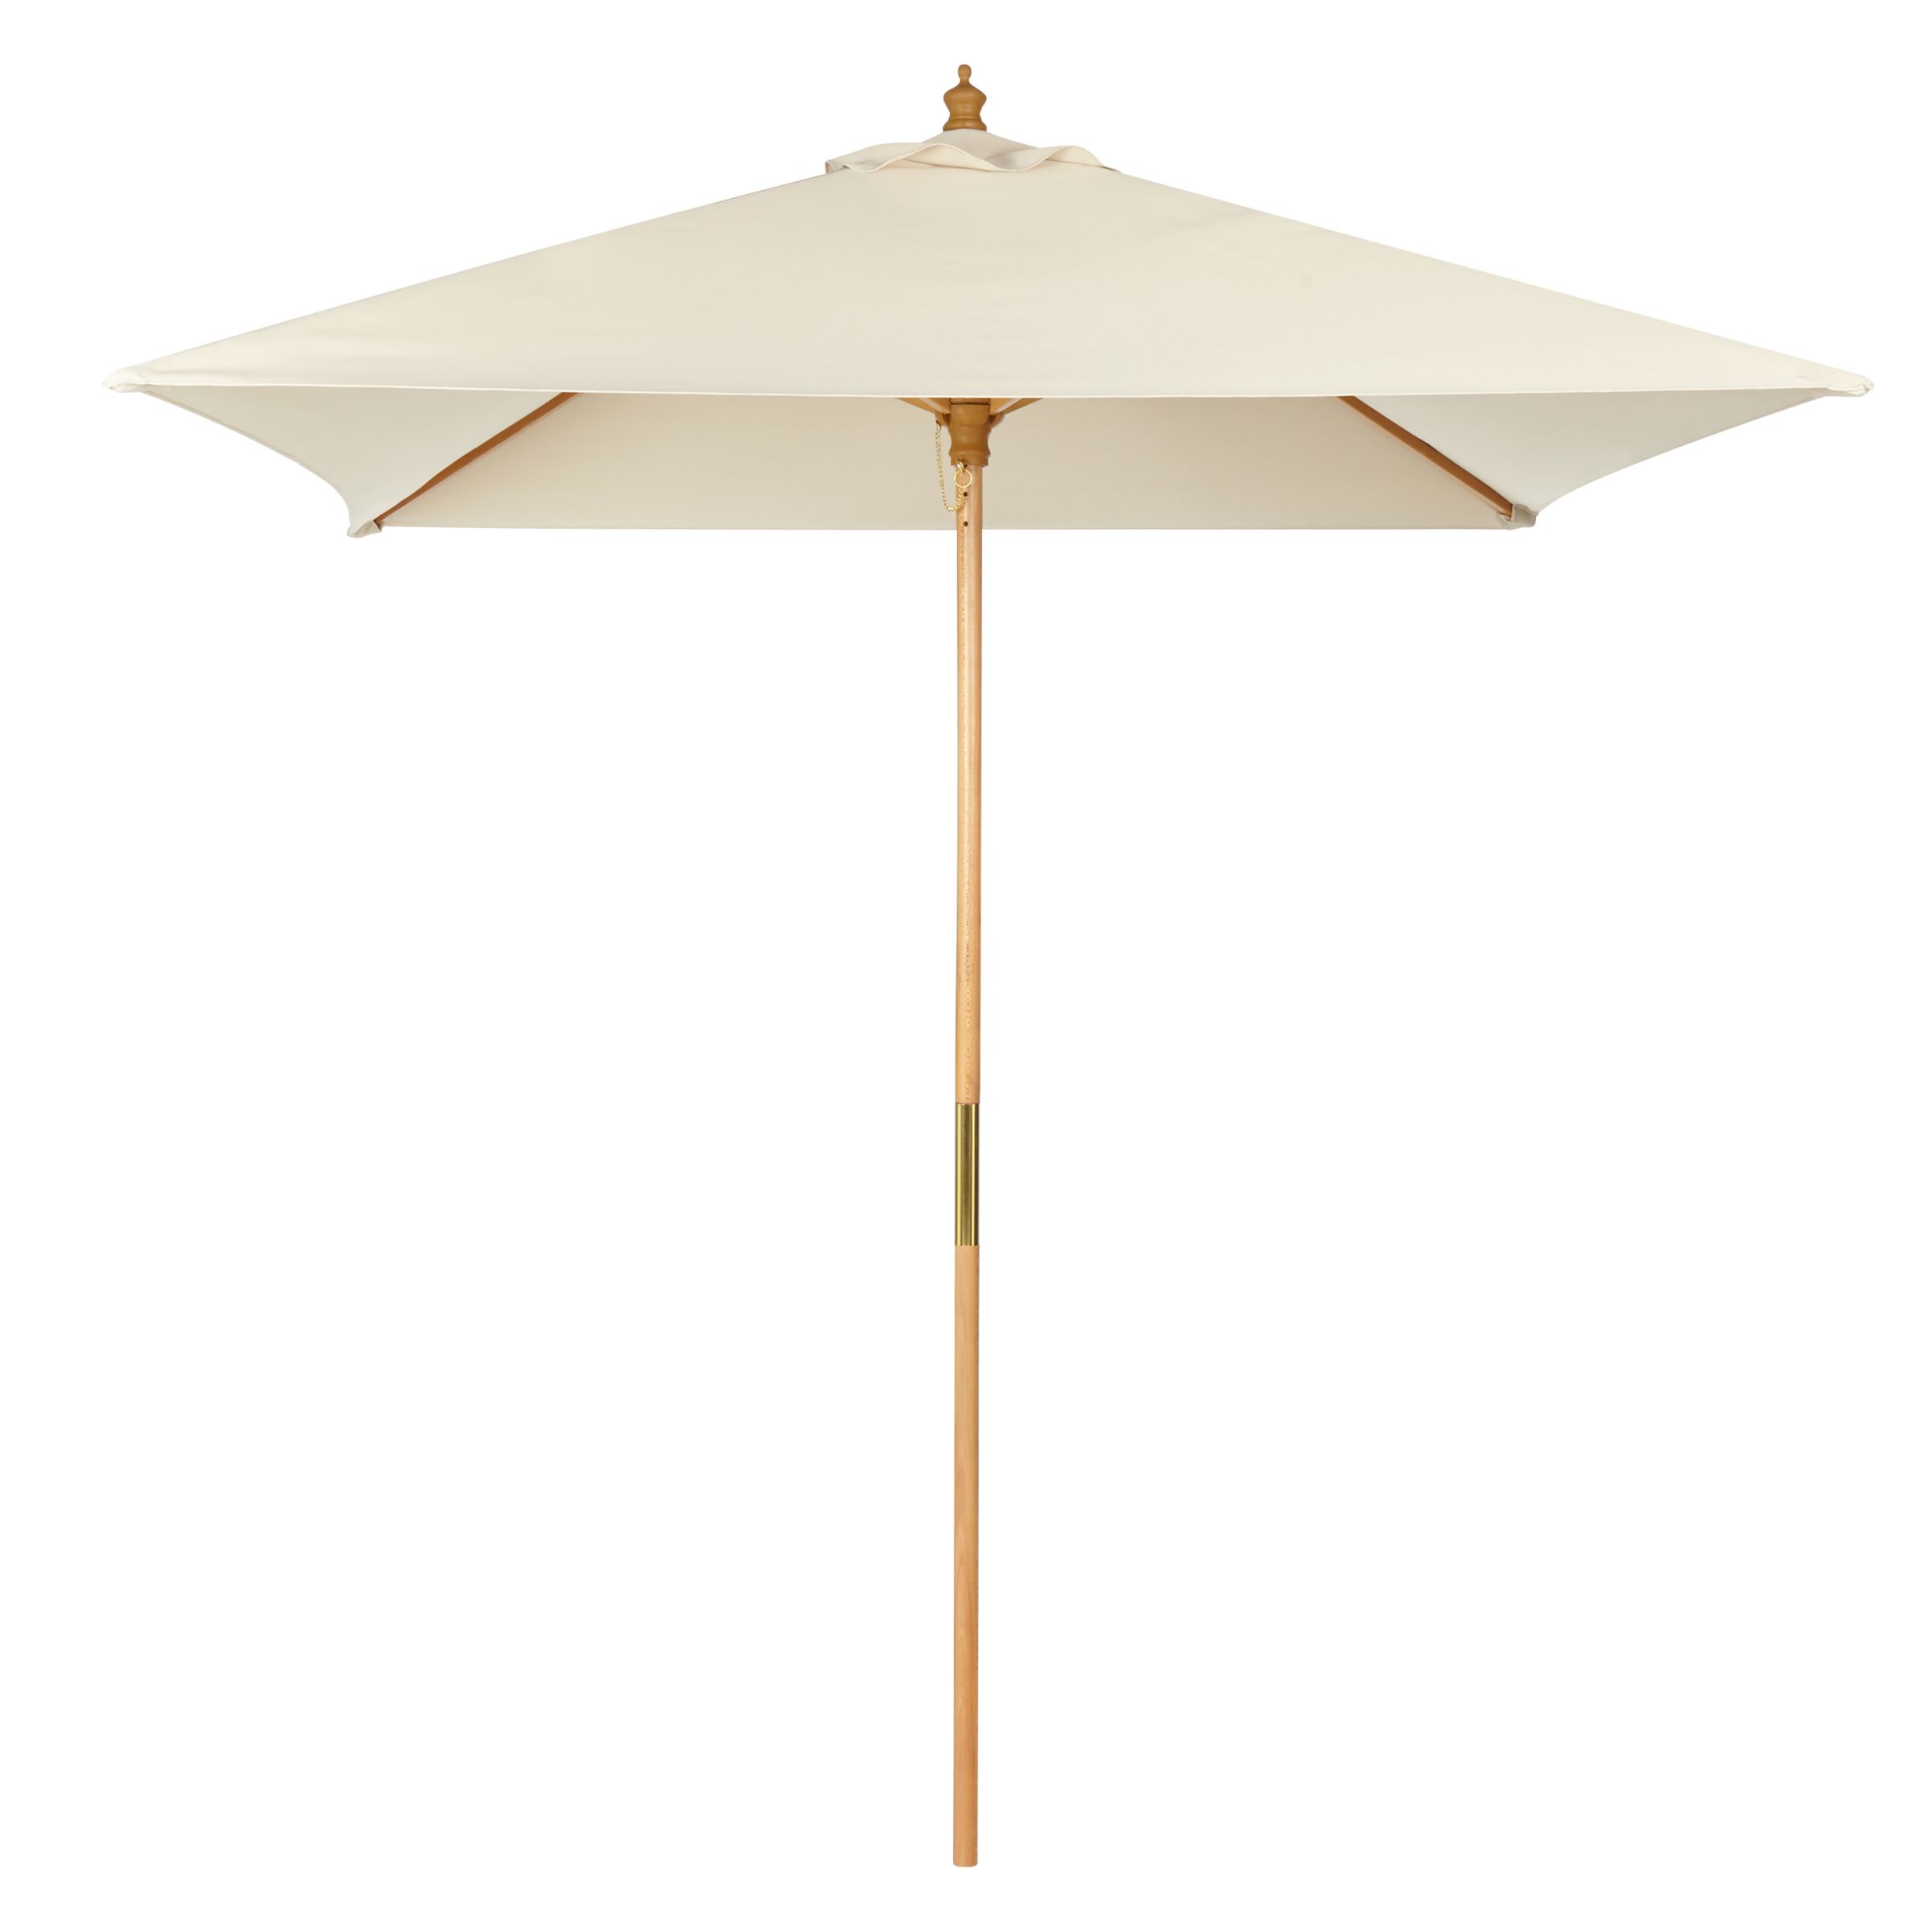 John Lewis 2m Wooden Parasol, FSC-Certified (Sycamore), Oyster